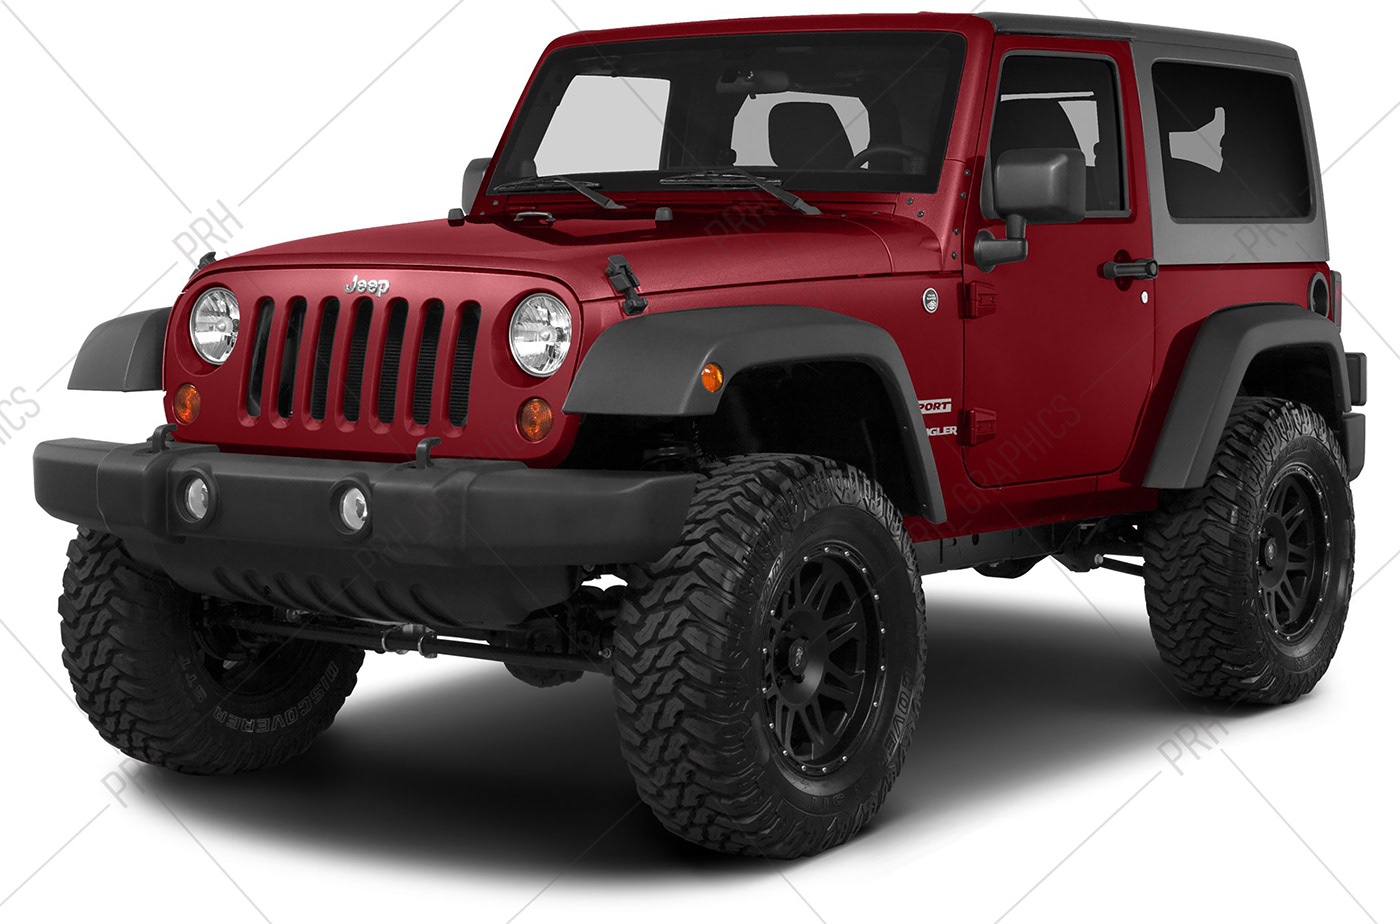 #clipping path service #clippingpathservice #editing service #jeep car #jeepcar #jeepcar service #jeepcarservice #photoretouchhouse #prh graphics #retouching